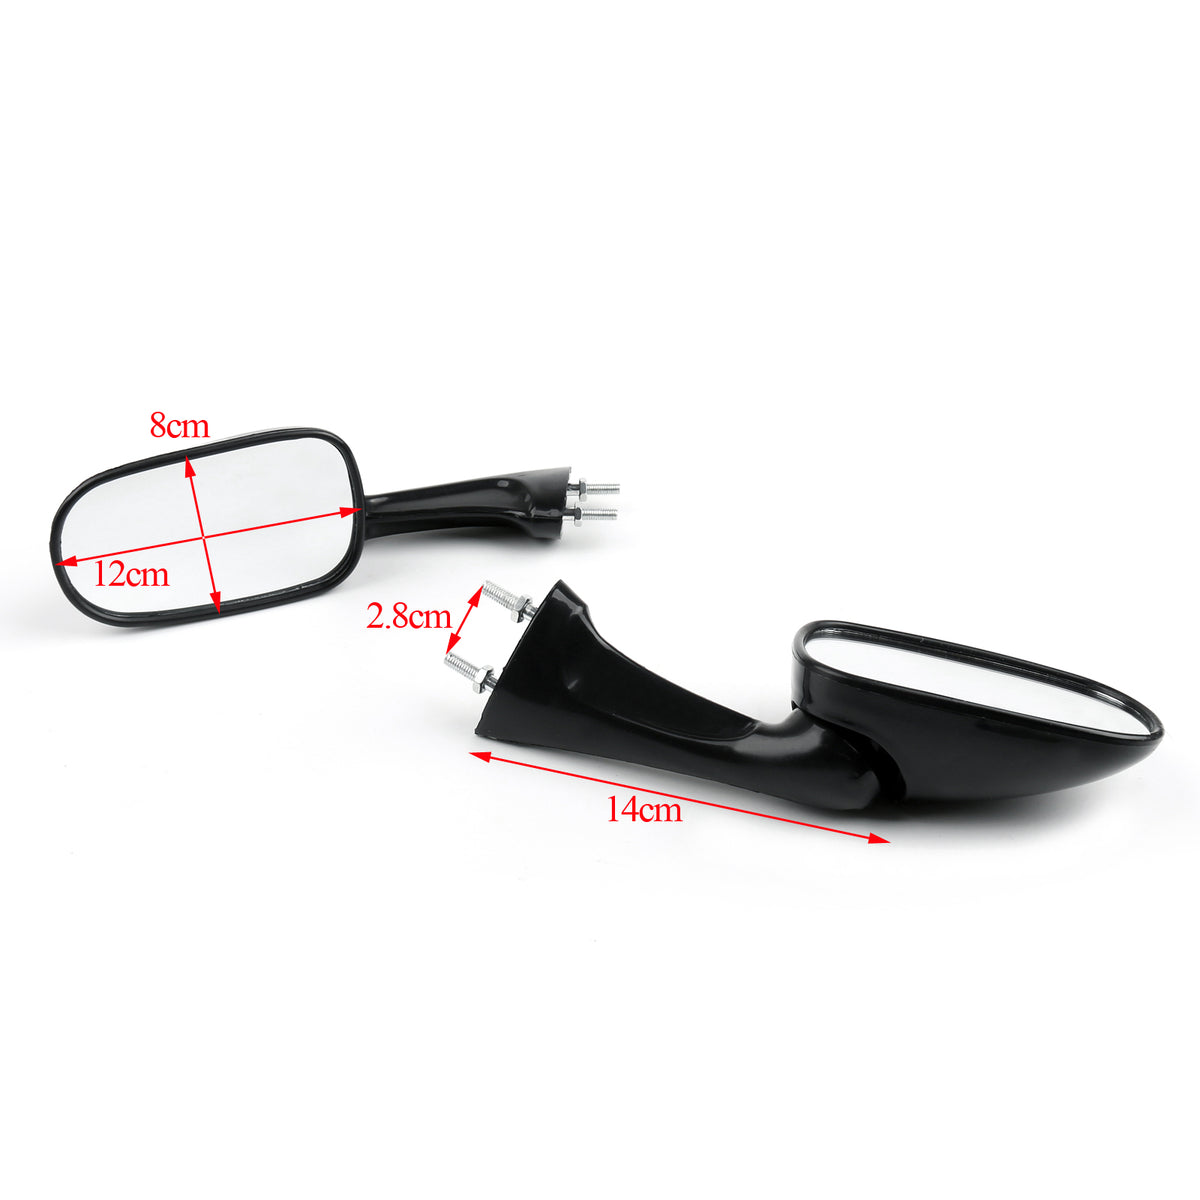 Pair Rearview Mirrors Fit for Honda CBR 250 400 NSR 250 SE SP VFR RVF 400 87-97 Generic